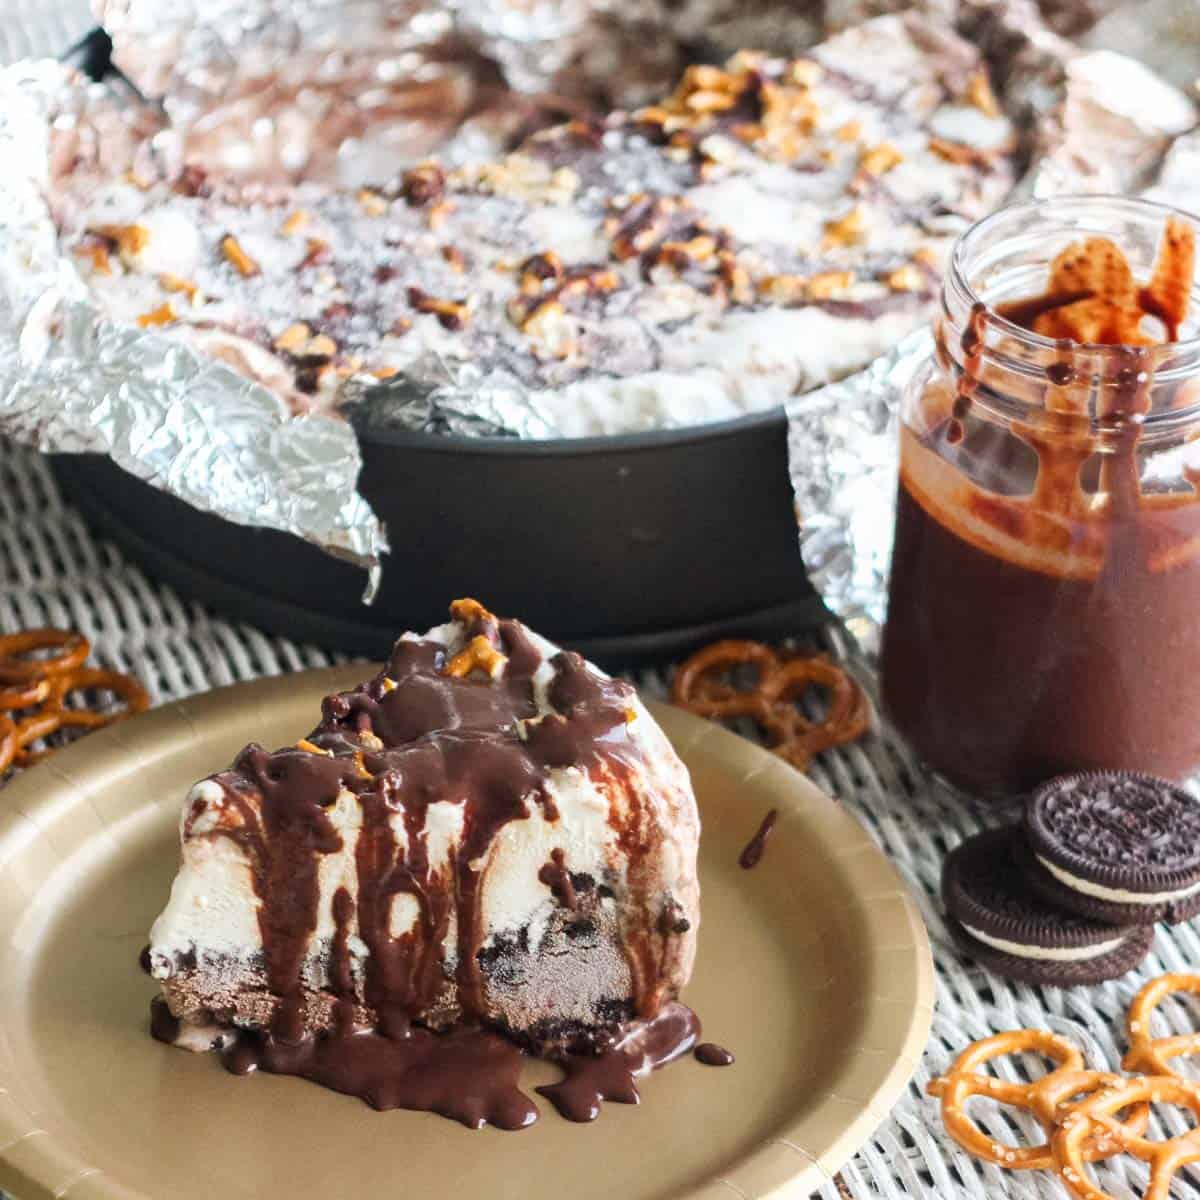 gold plate with ice cream pie drizzled in chocolate sauce next to pretzels, oreos, a jar of chocolate sauce made with chocolate chips, and a pan with ice cream pie.